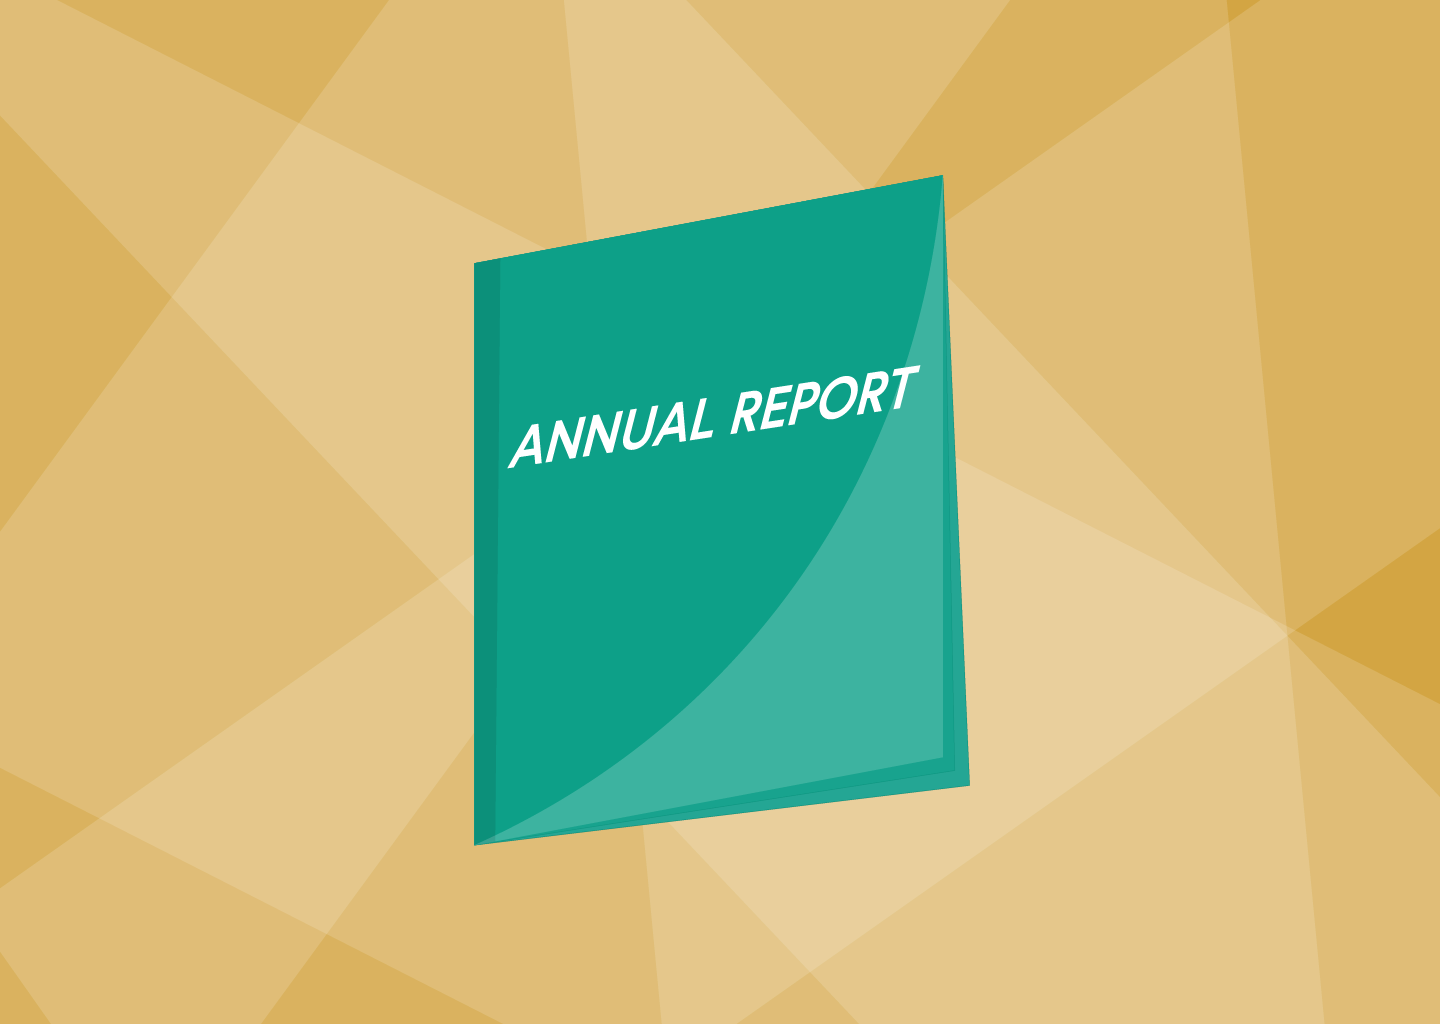 #43 — Annual Report (2023 Fiscal Year)*